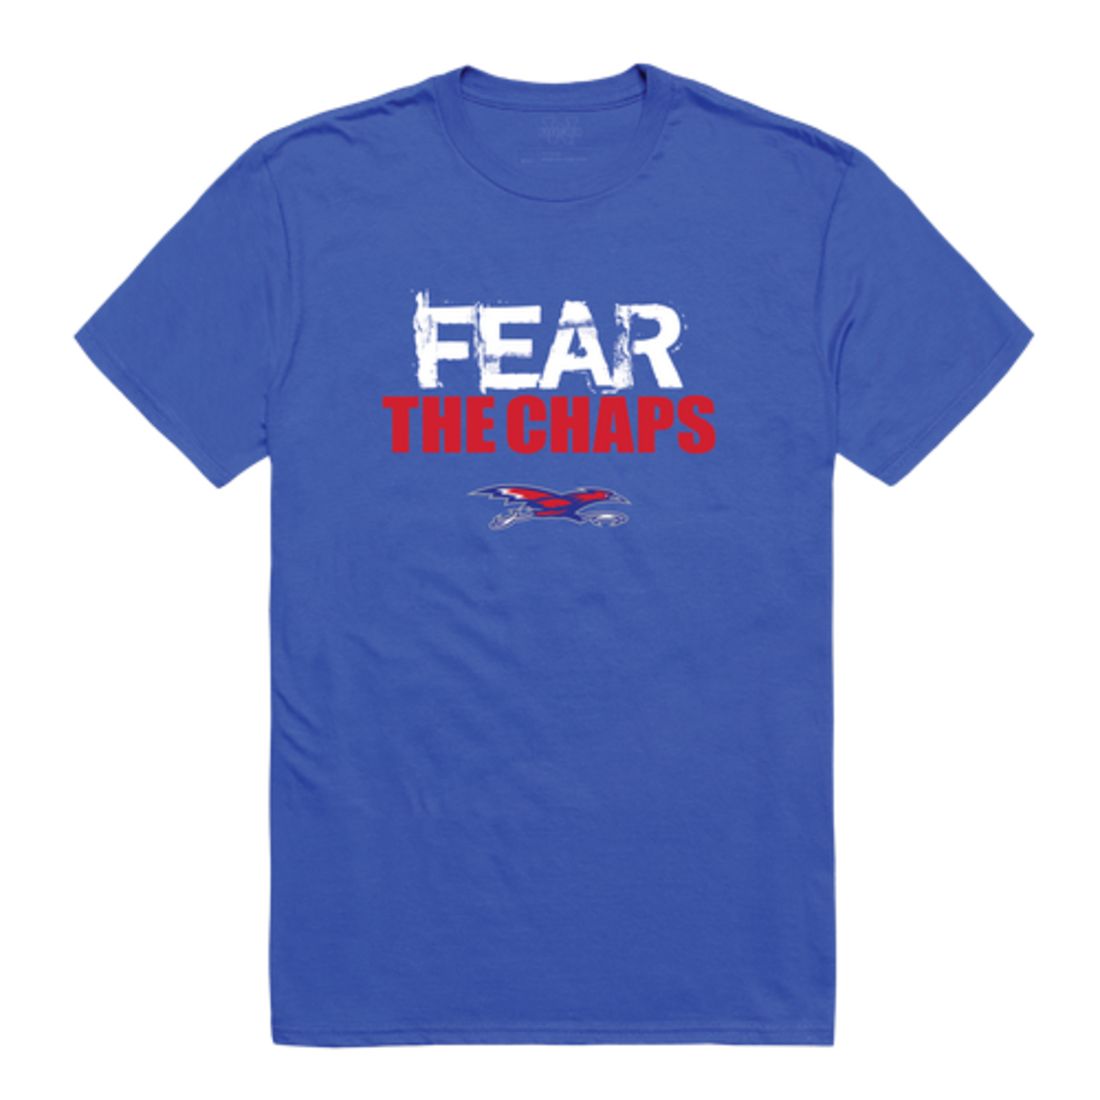 Fear The Lubbock Christian University Chaparral T-Shirt Tee